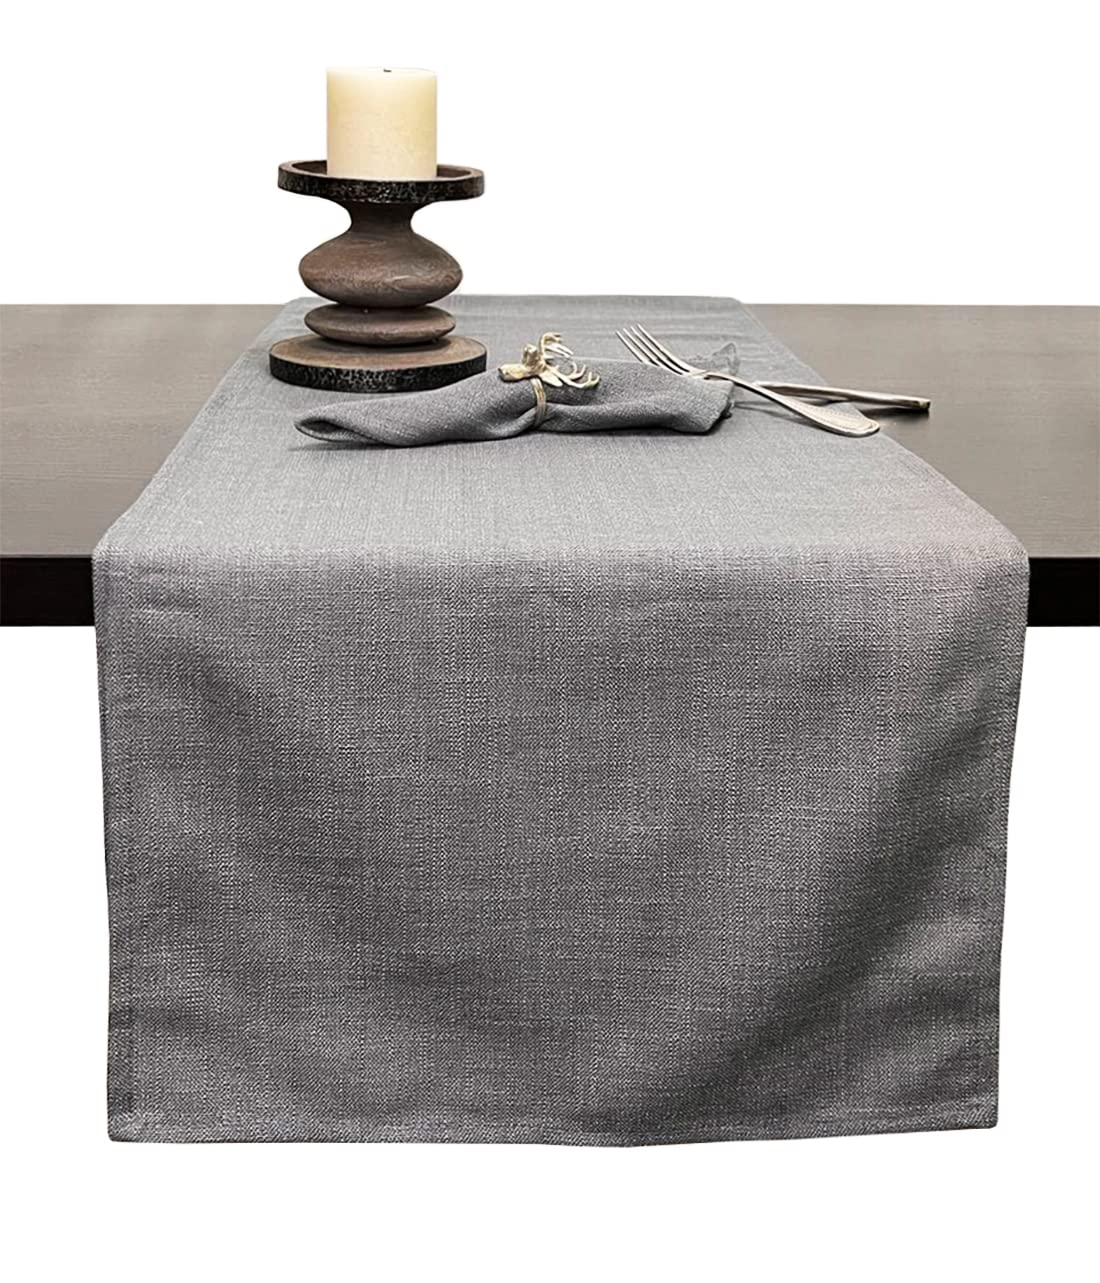 Fennco Styles Everyday Design Solid Color Table Runner 16" W x 54" L - Natural Table Cover for Home, Farmhouse Décor, Banquets, Family Gathering and Special Occasion